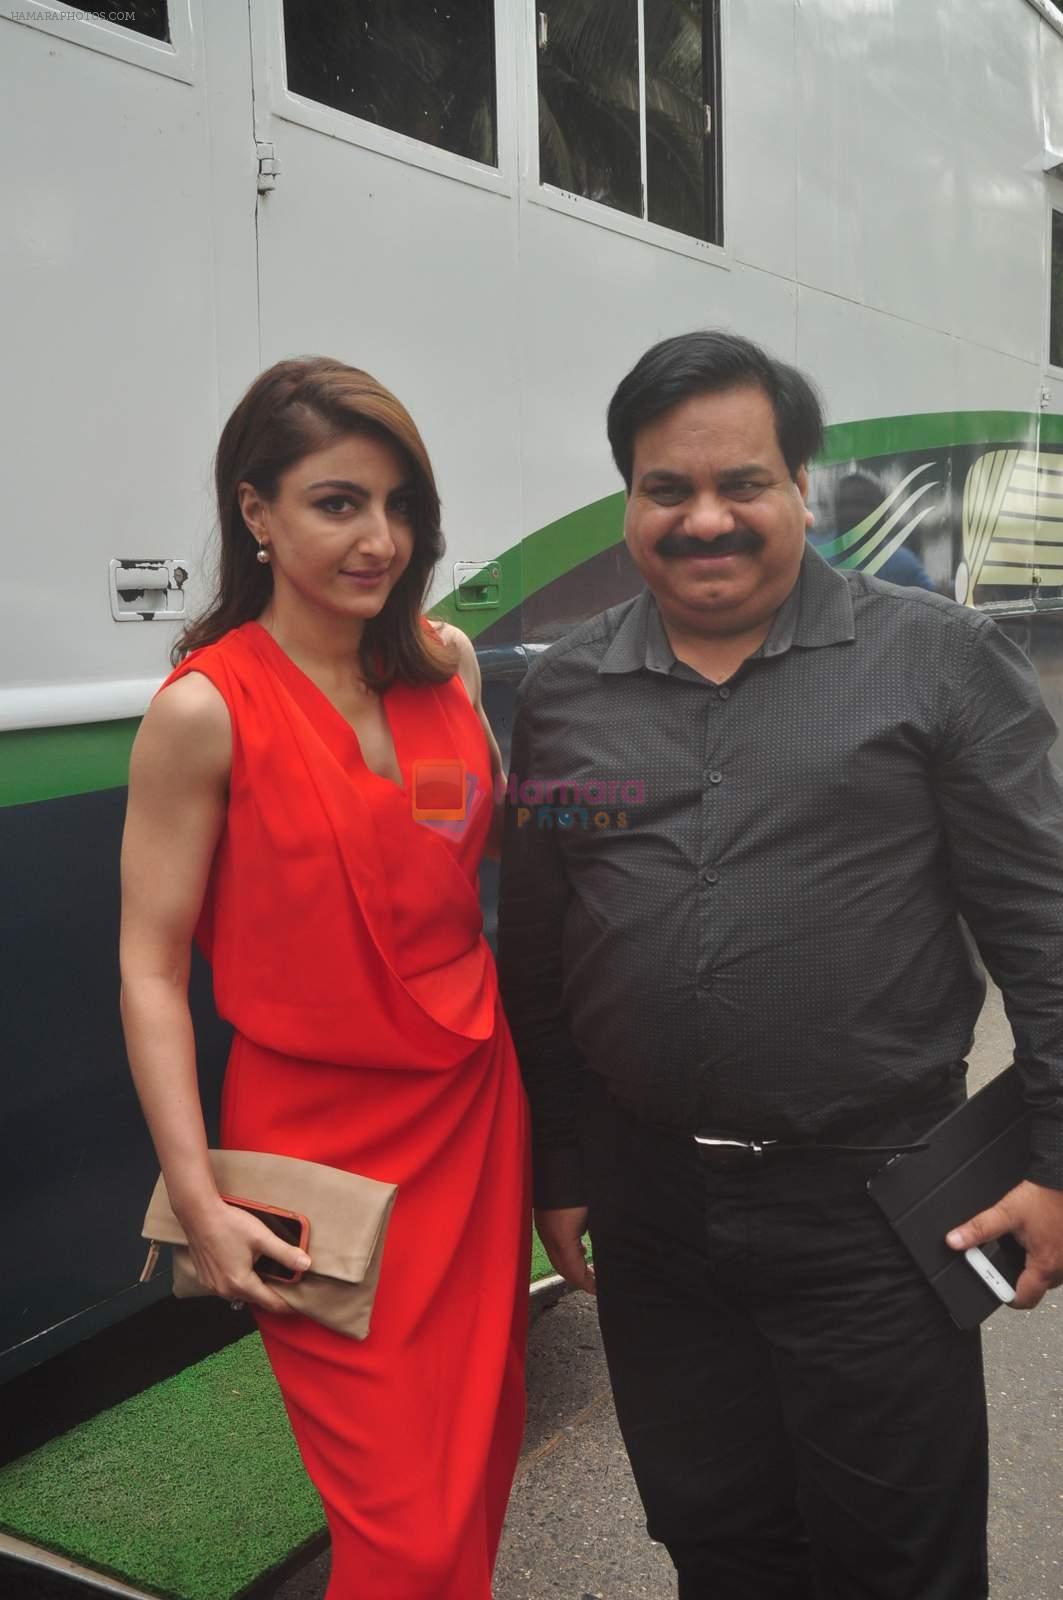 Soha Ali Khan at asian paints event on 28th Oct 2015